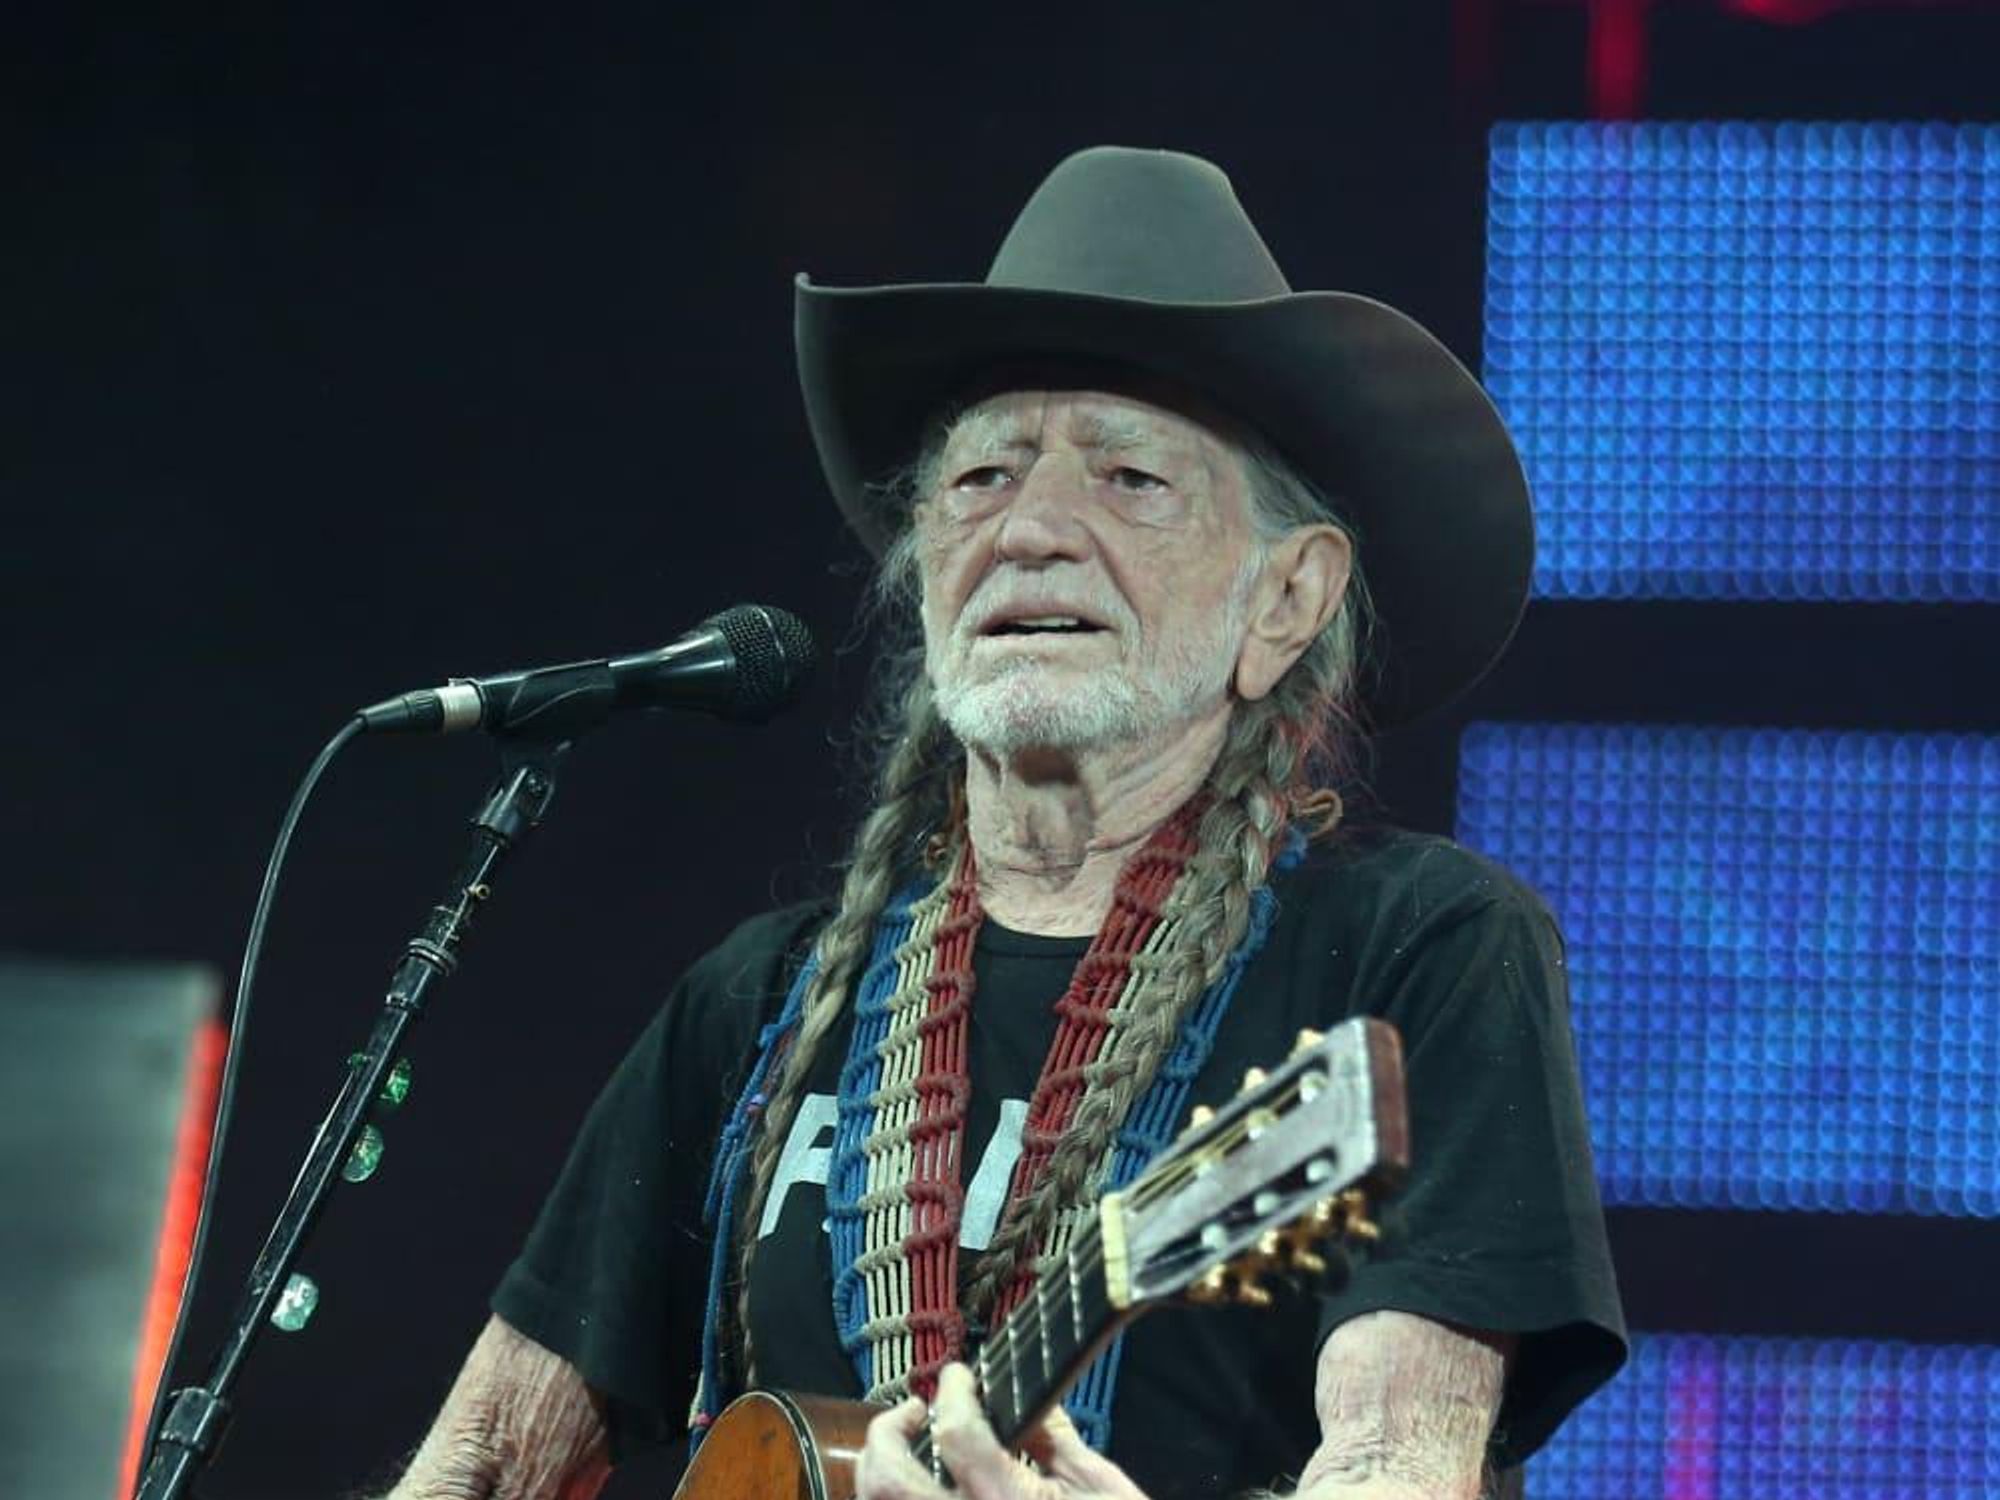 Willie Nelson at RodeoHouston 2017